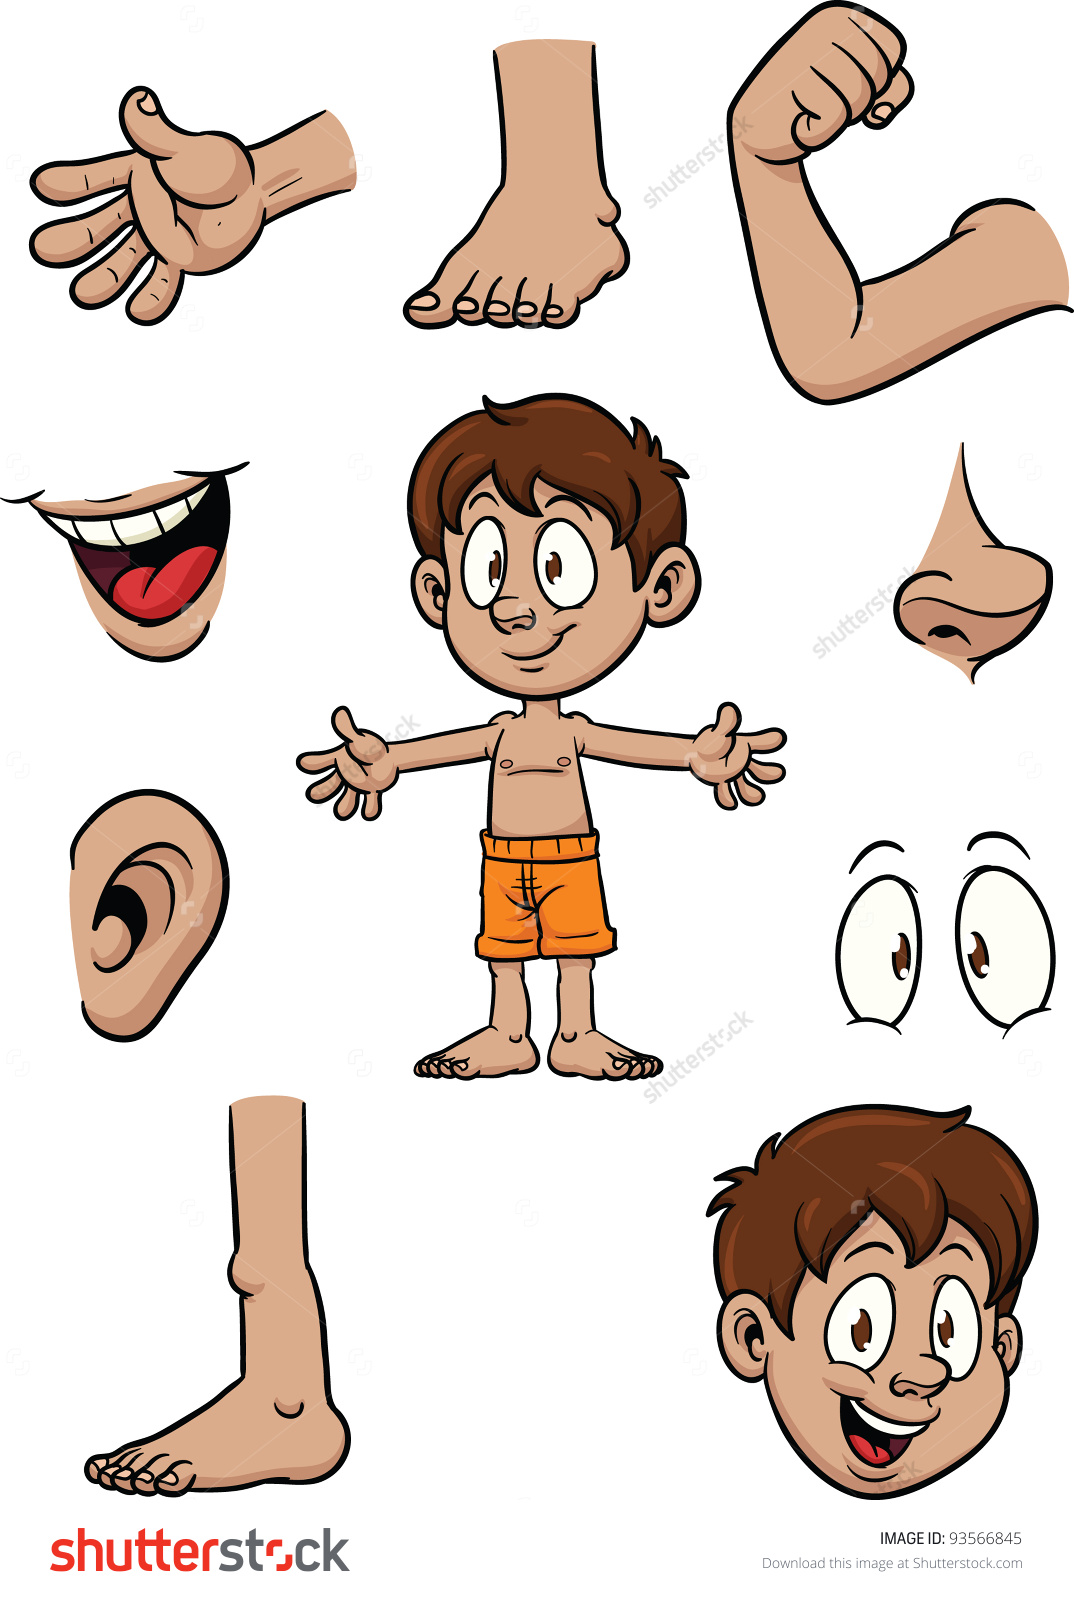 Part of the body clipart - Clipground